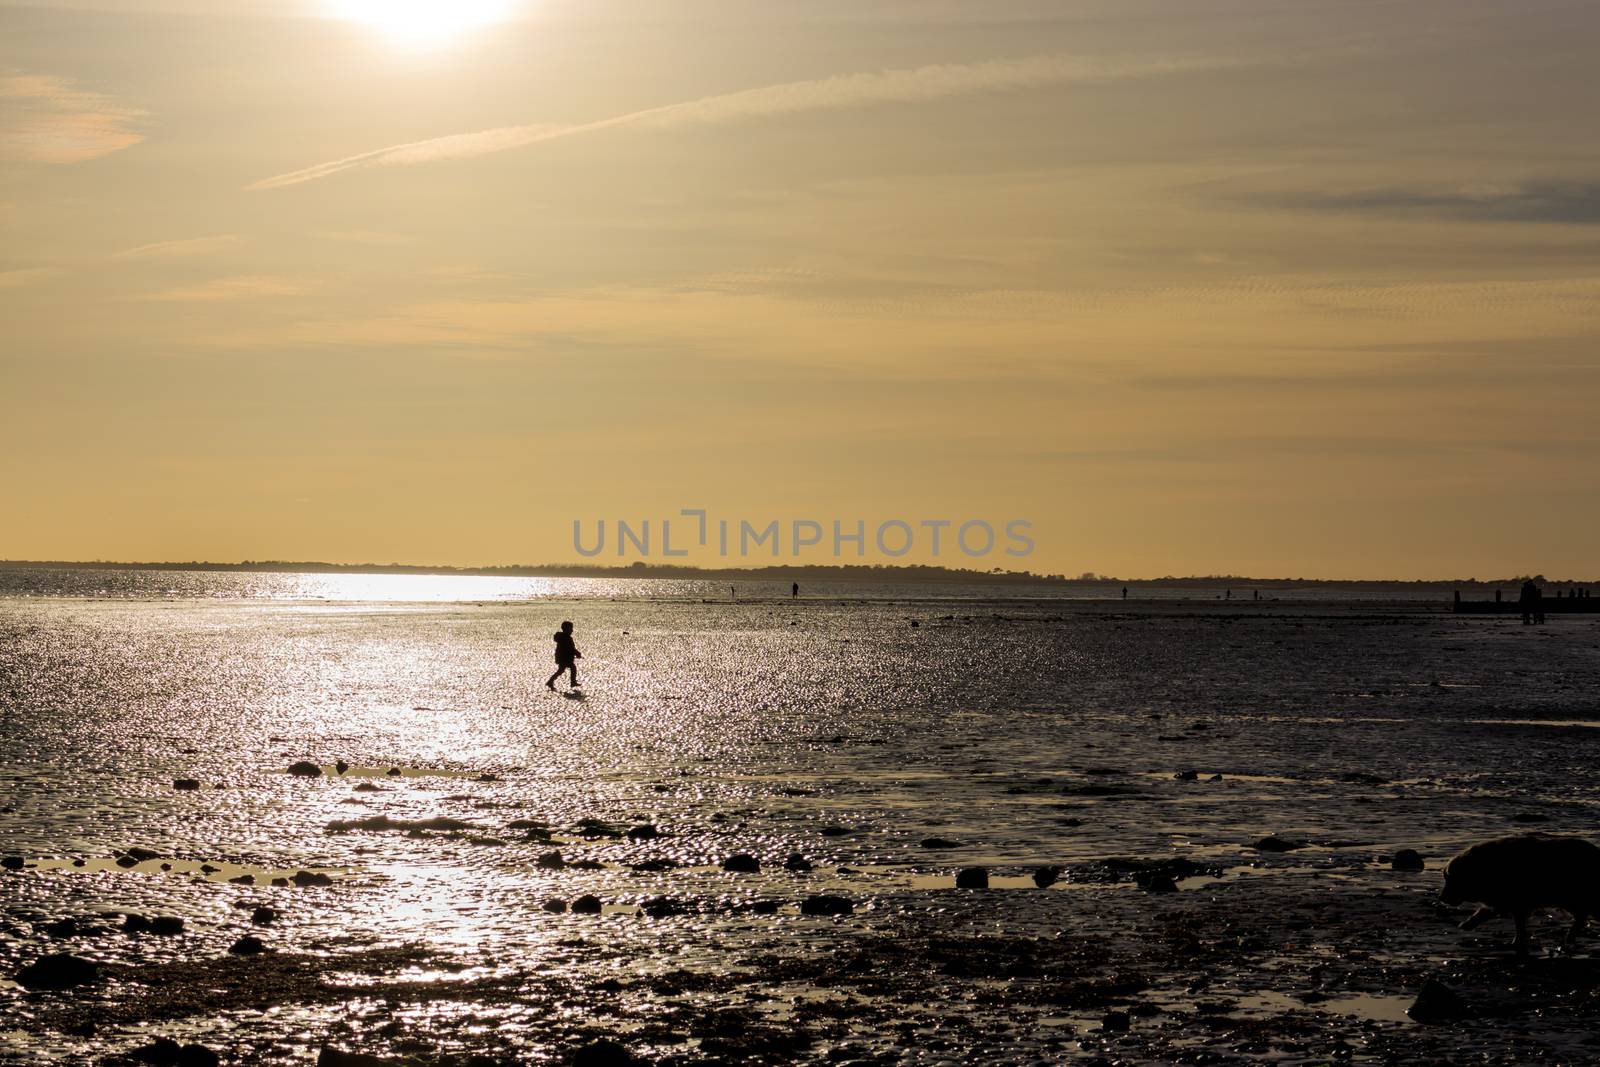 Silhouette of a small child playing on british sunset beach